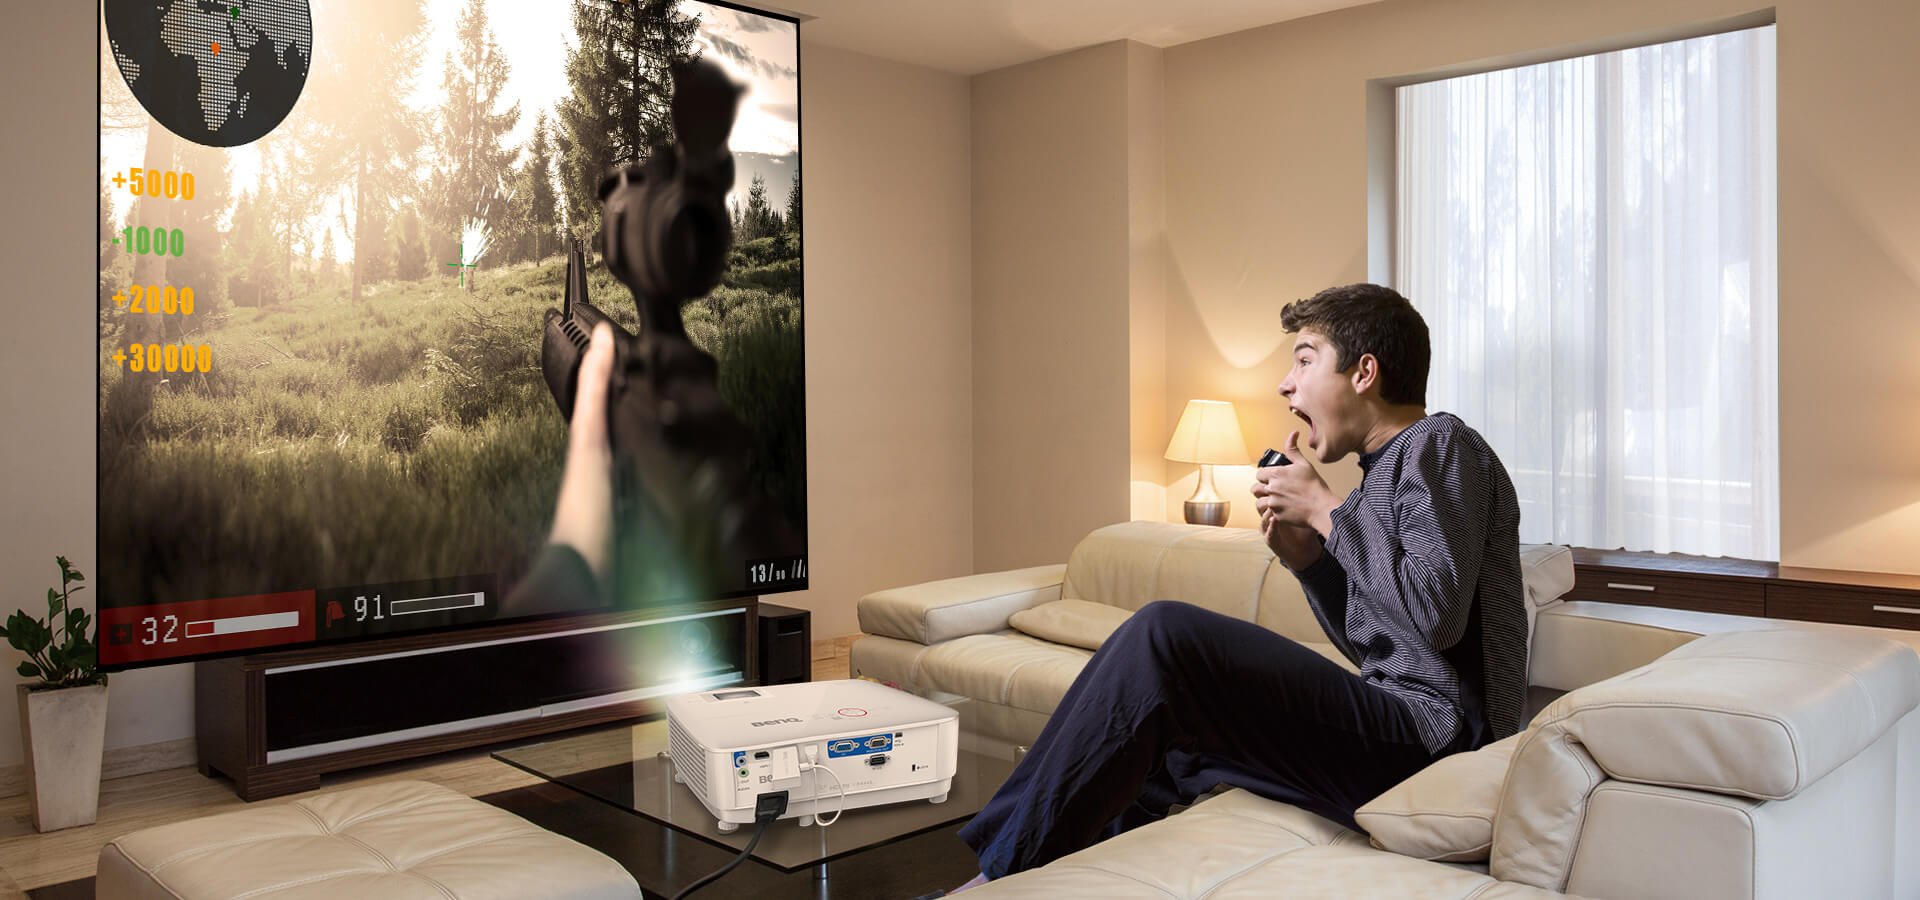 BenQ short throw projector for gaming TH671ST provides you a high-quality of gaming experiences, which can expand your gaming world to make you feel like you’re really in the game.